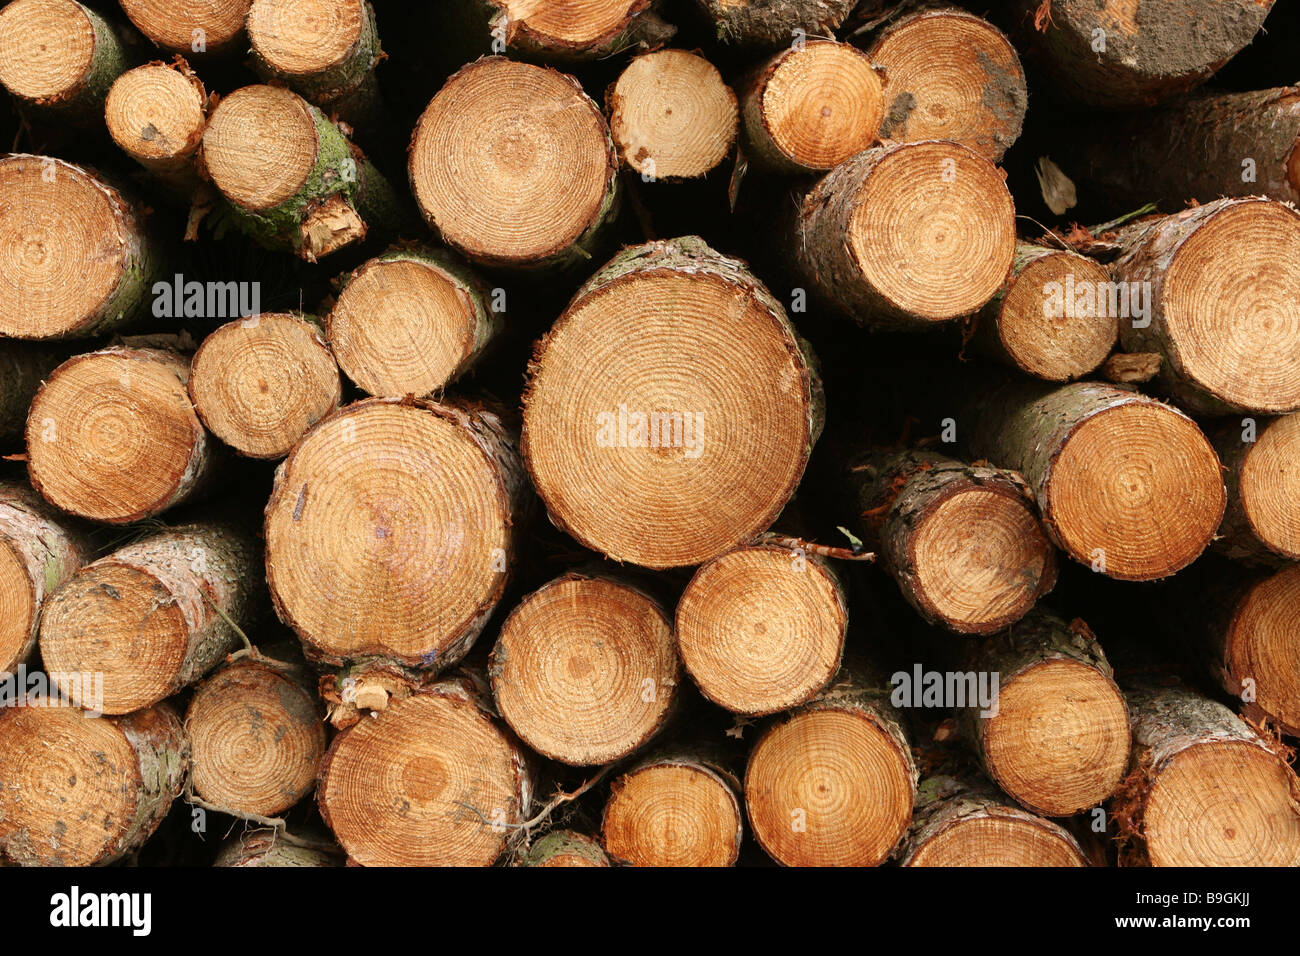 A pile of Cut Wooden Logs Stock Photo